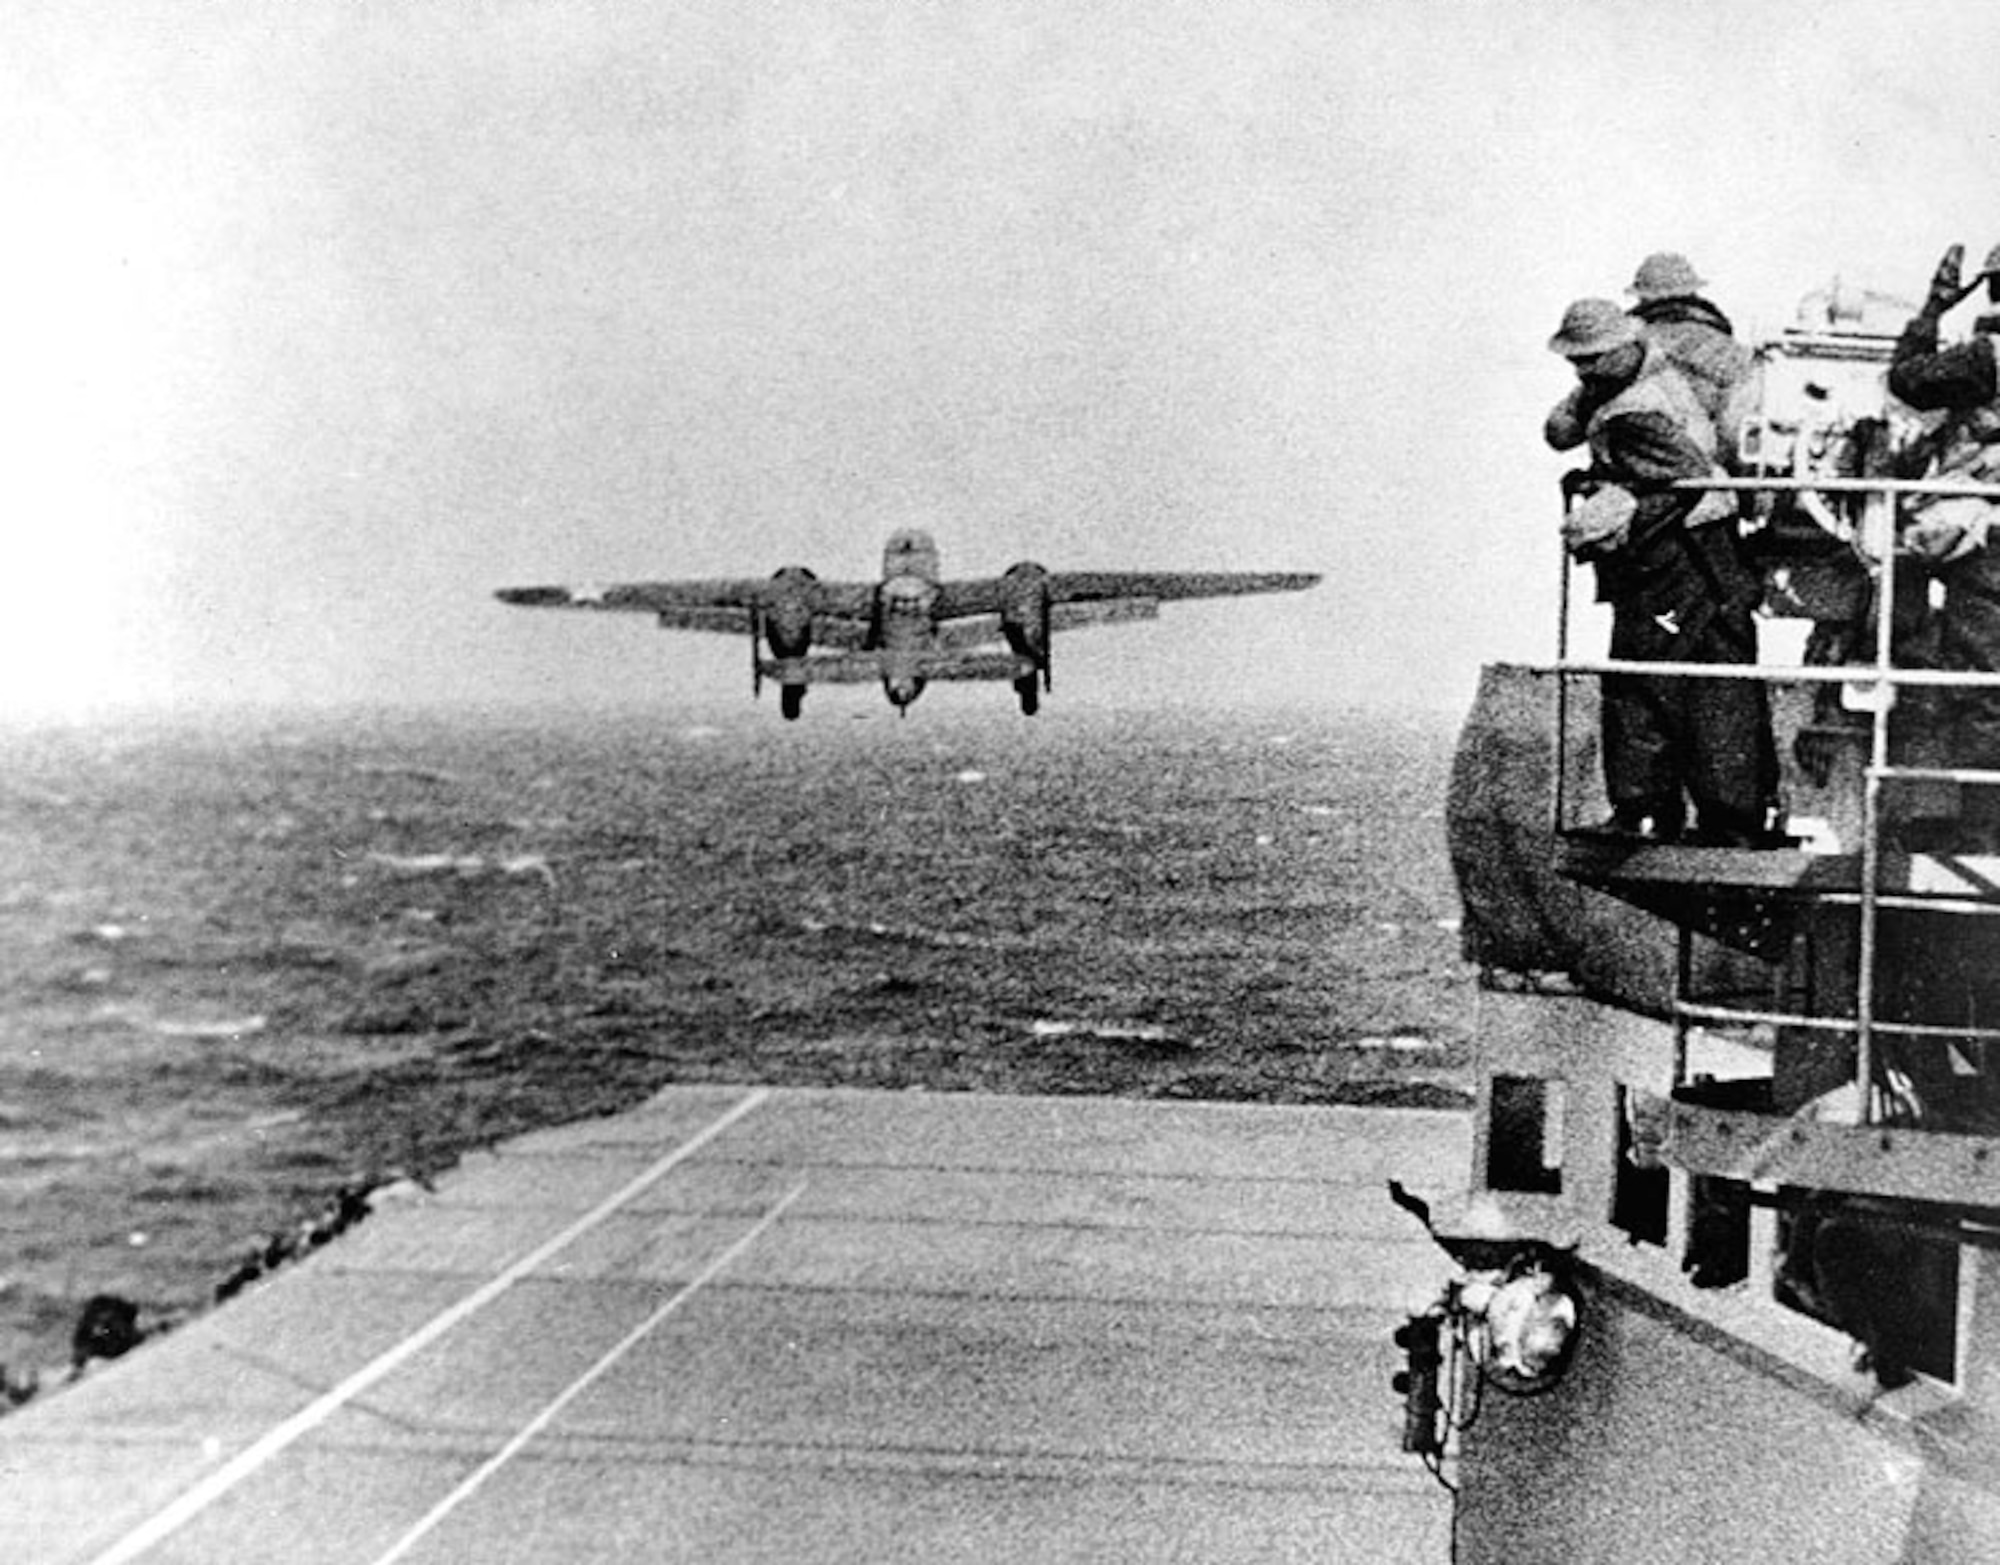 A B-25 thunders skyward off the deck of the USS Hornet. Around 600 miles from Japan mainland, a small fishing boat was spotted and destroyed by the Hornet and its crew. Lt. Col. James Doolittle felt this small boat may have warned Japan, so he ordered the raid to proceed immediately. (U.S. Air Force courtesy photo)